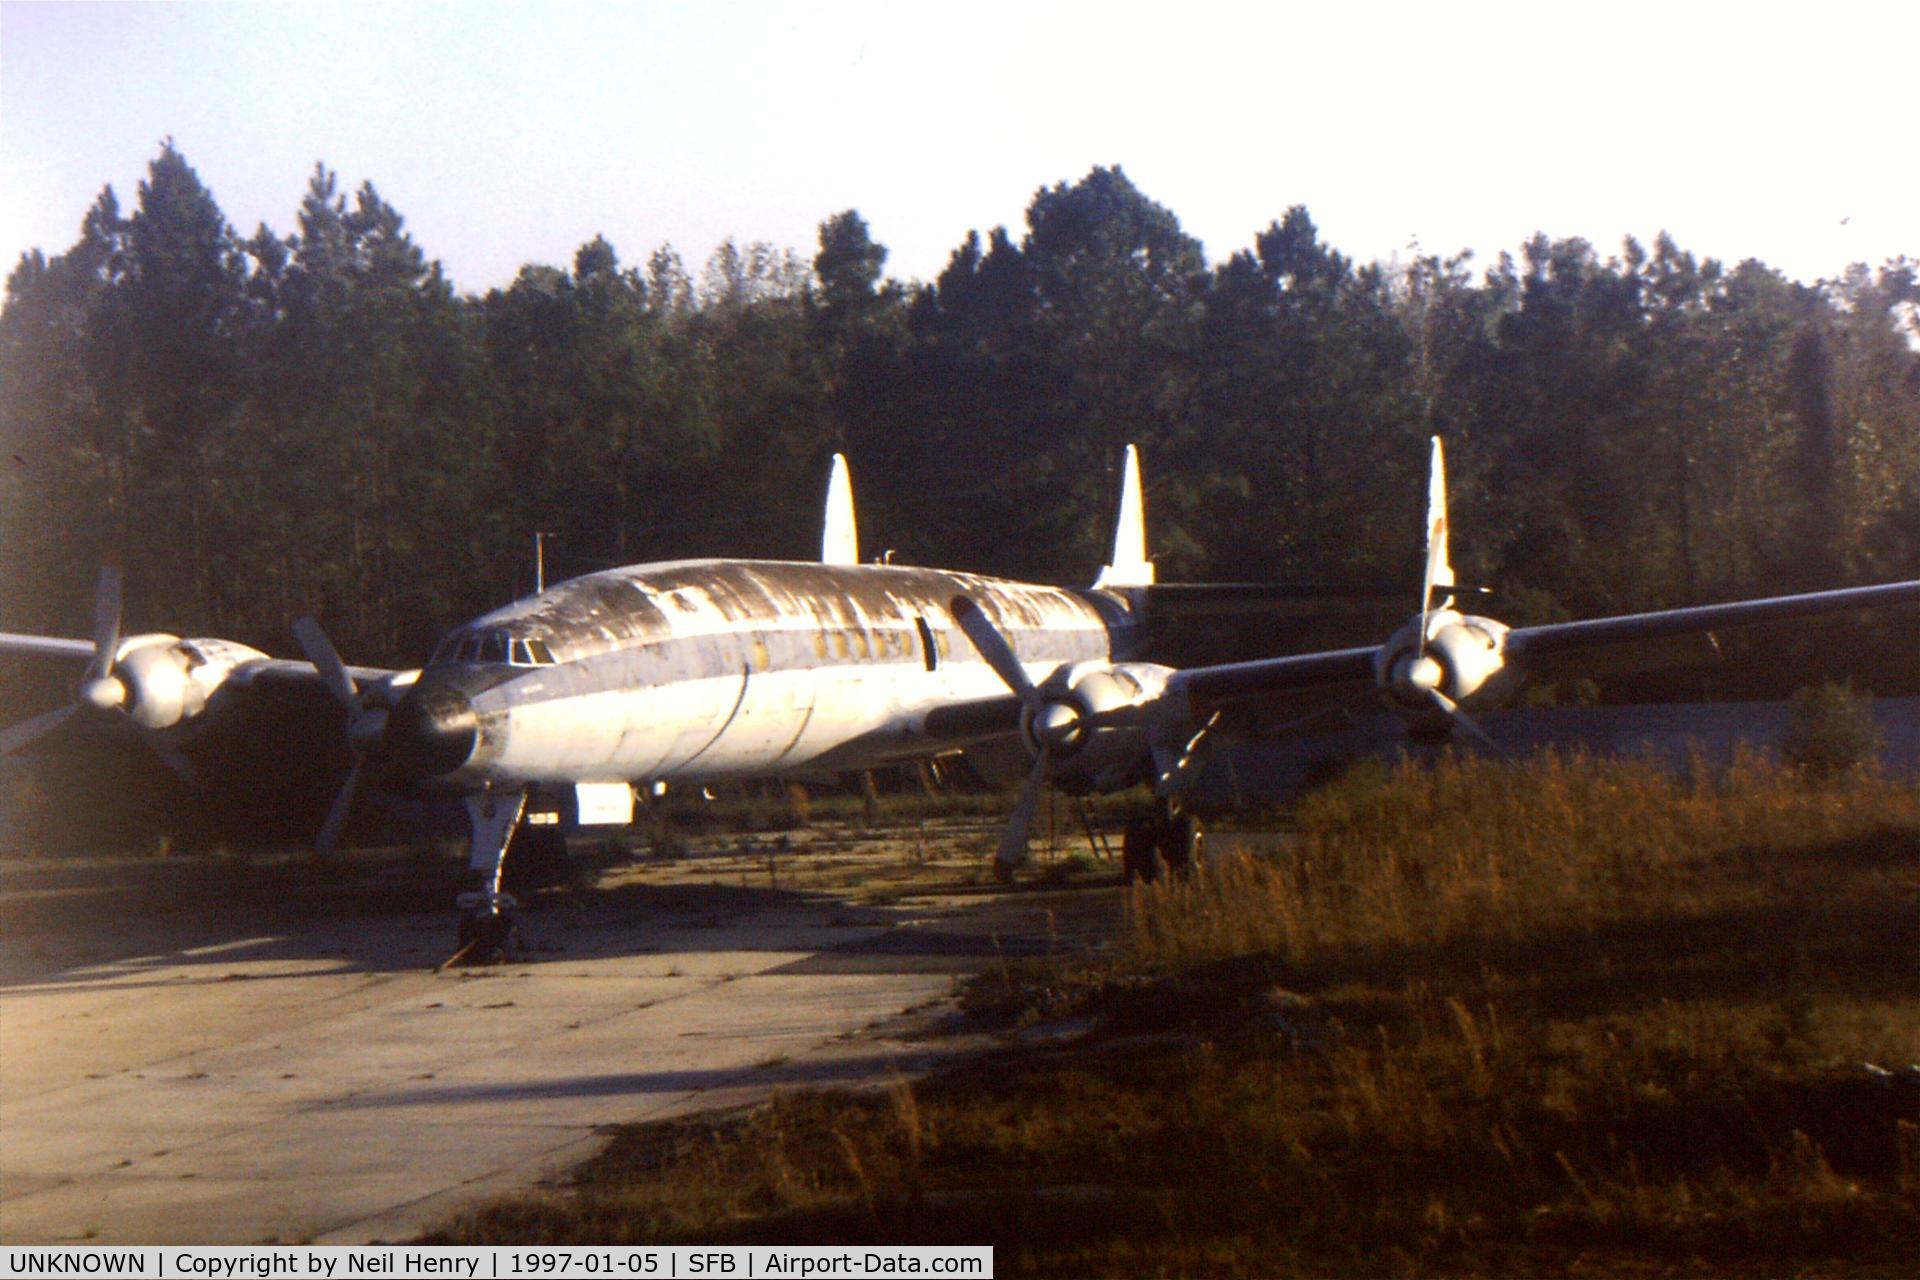 UNKNOWN, Miscellaneous Various C/N unknown, Derelict Lockheed Constellation (unidentified) possibly used for training ground staff - parked at northern end on main runway SFB - as seen from departing flight.  Scanned from original slide